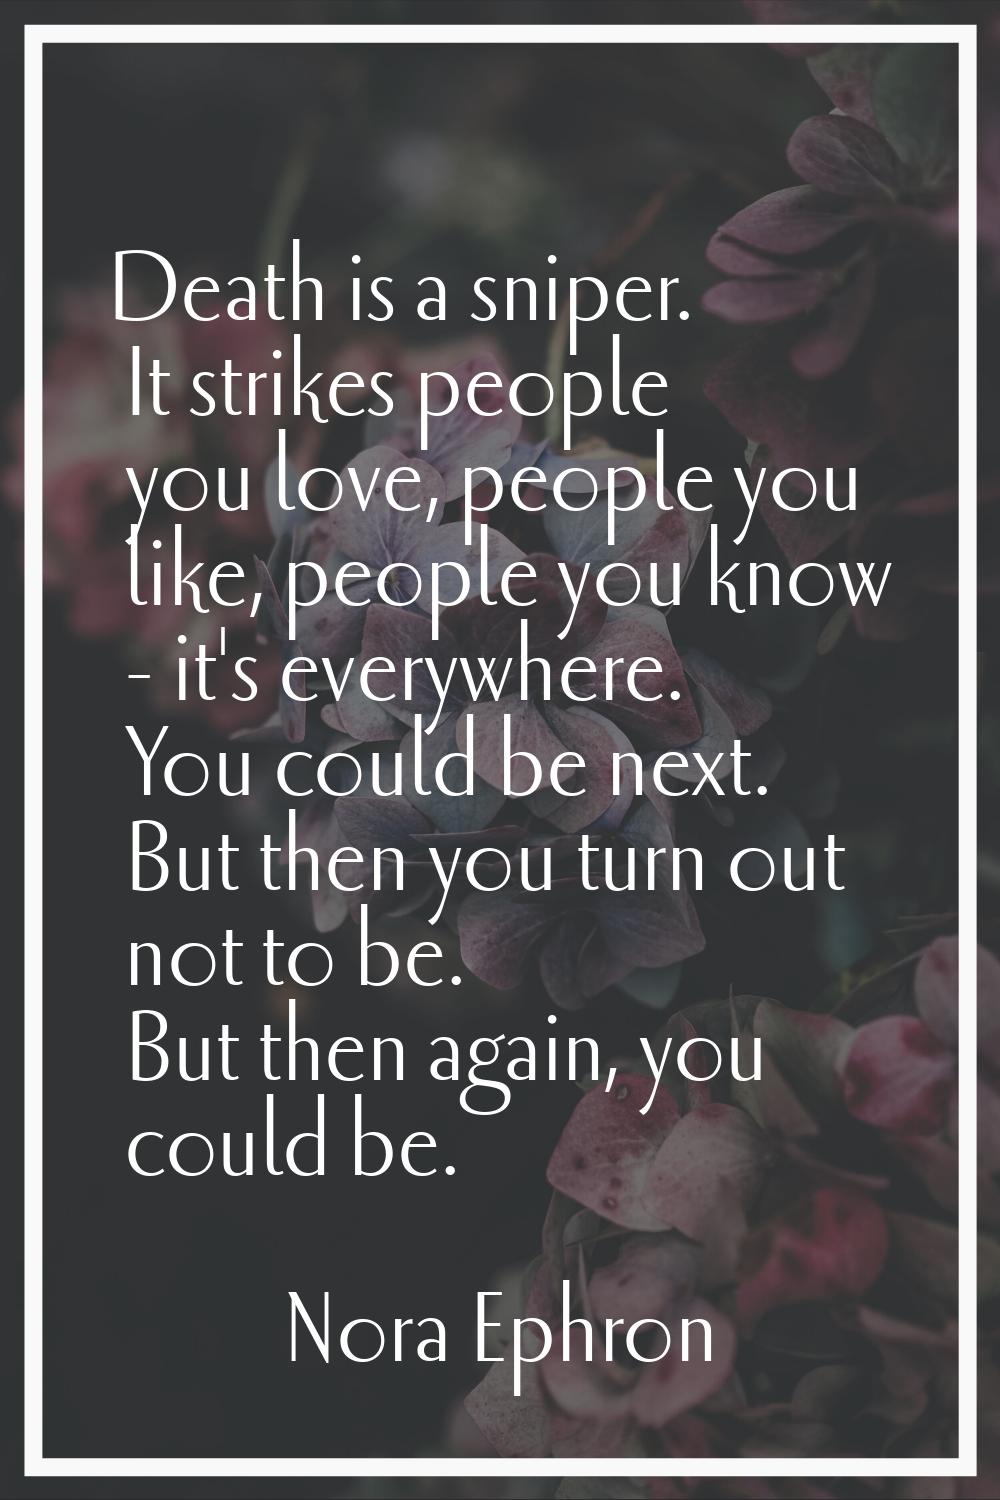 Death is a sniper. It strikes people you love, people you like, people you know - it's everywhere. 